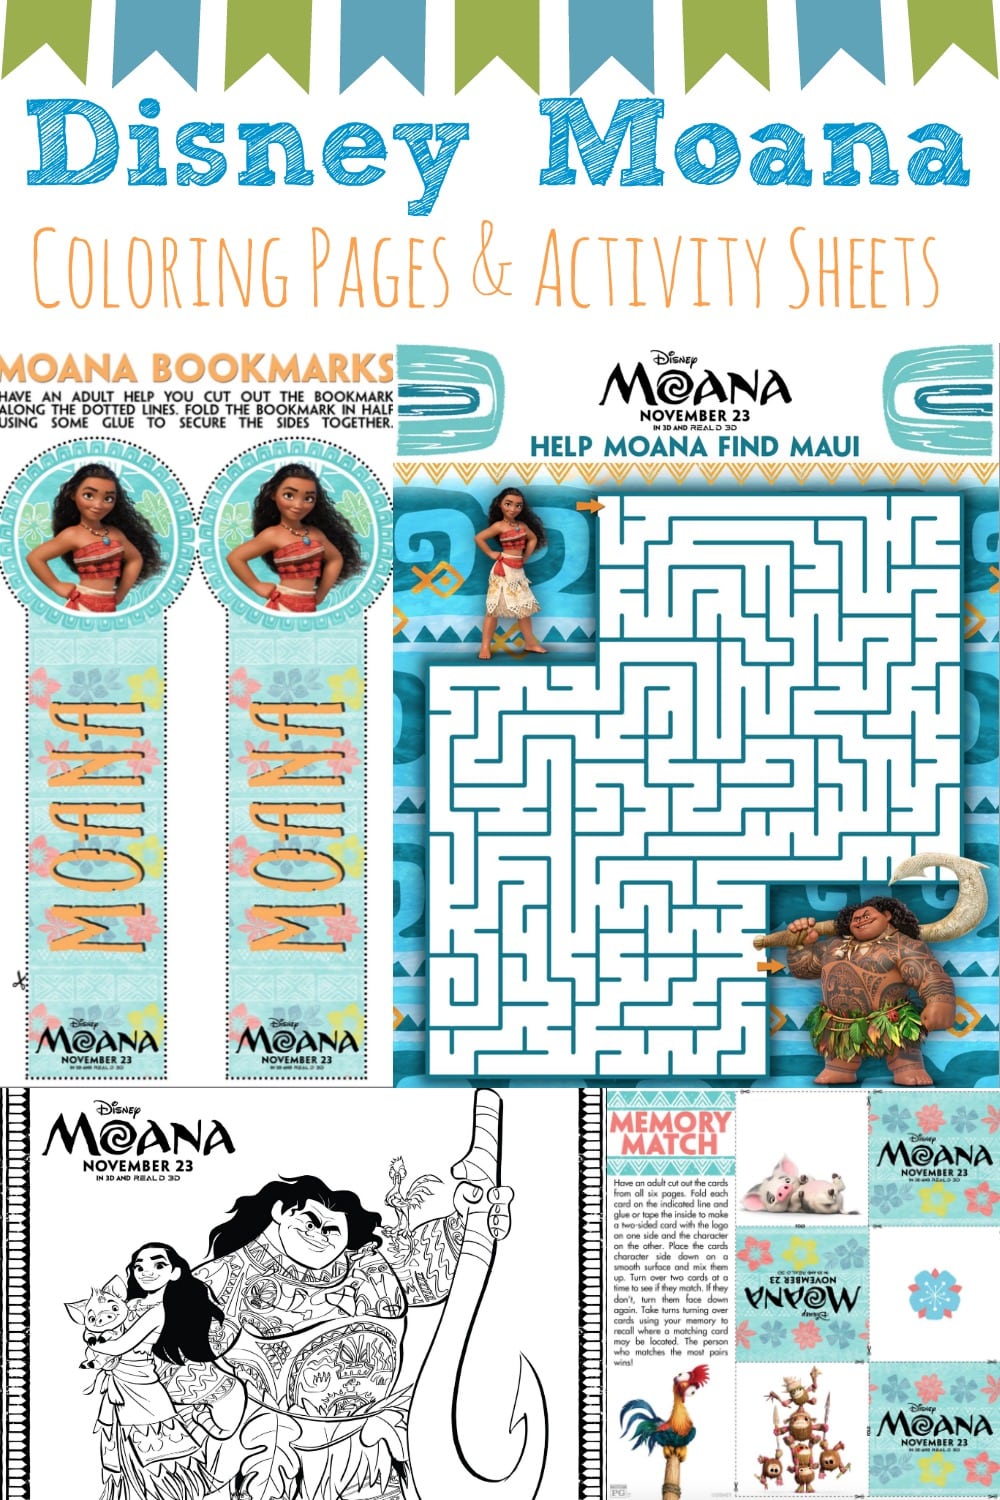 Moana Coloring Pages and Activity Sheets #Moana - simplytodaylife.com